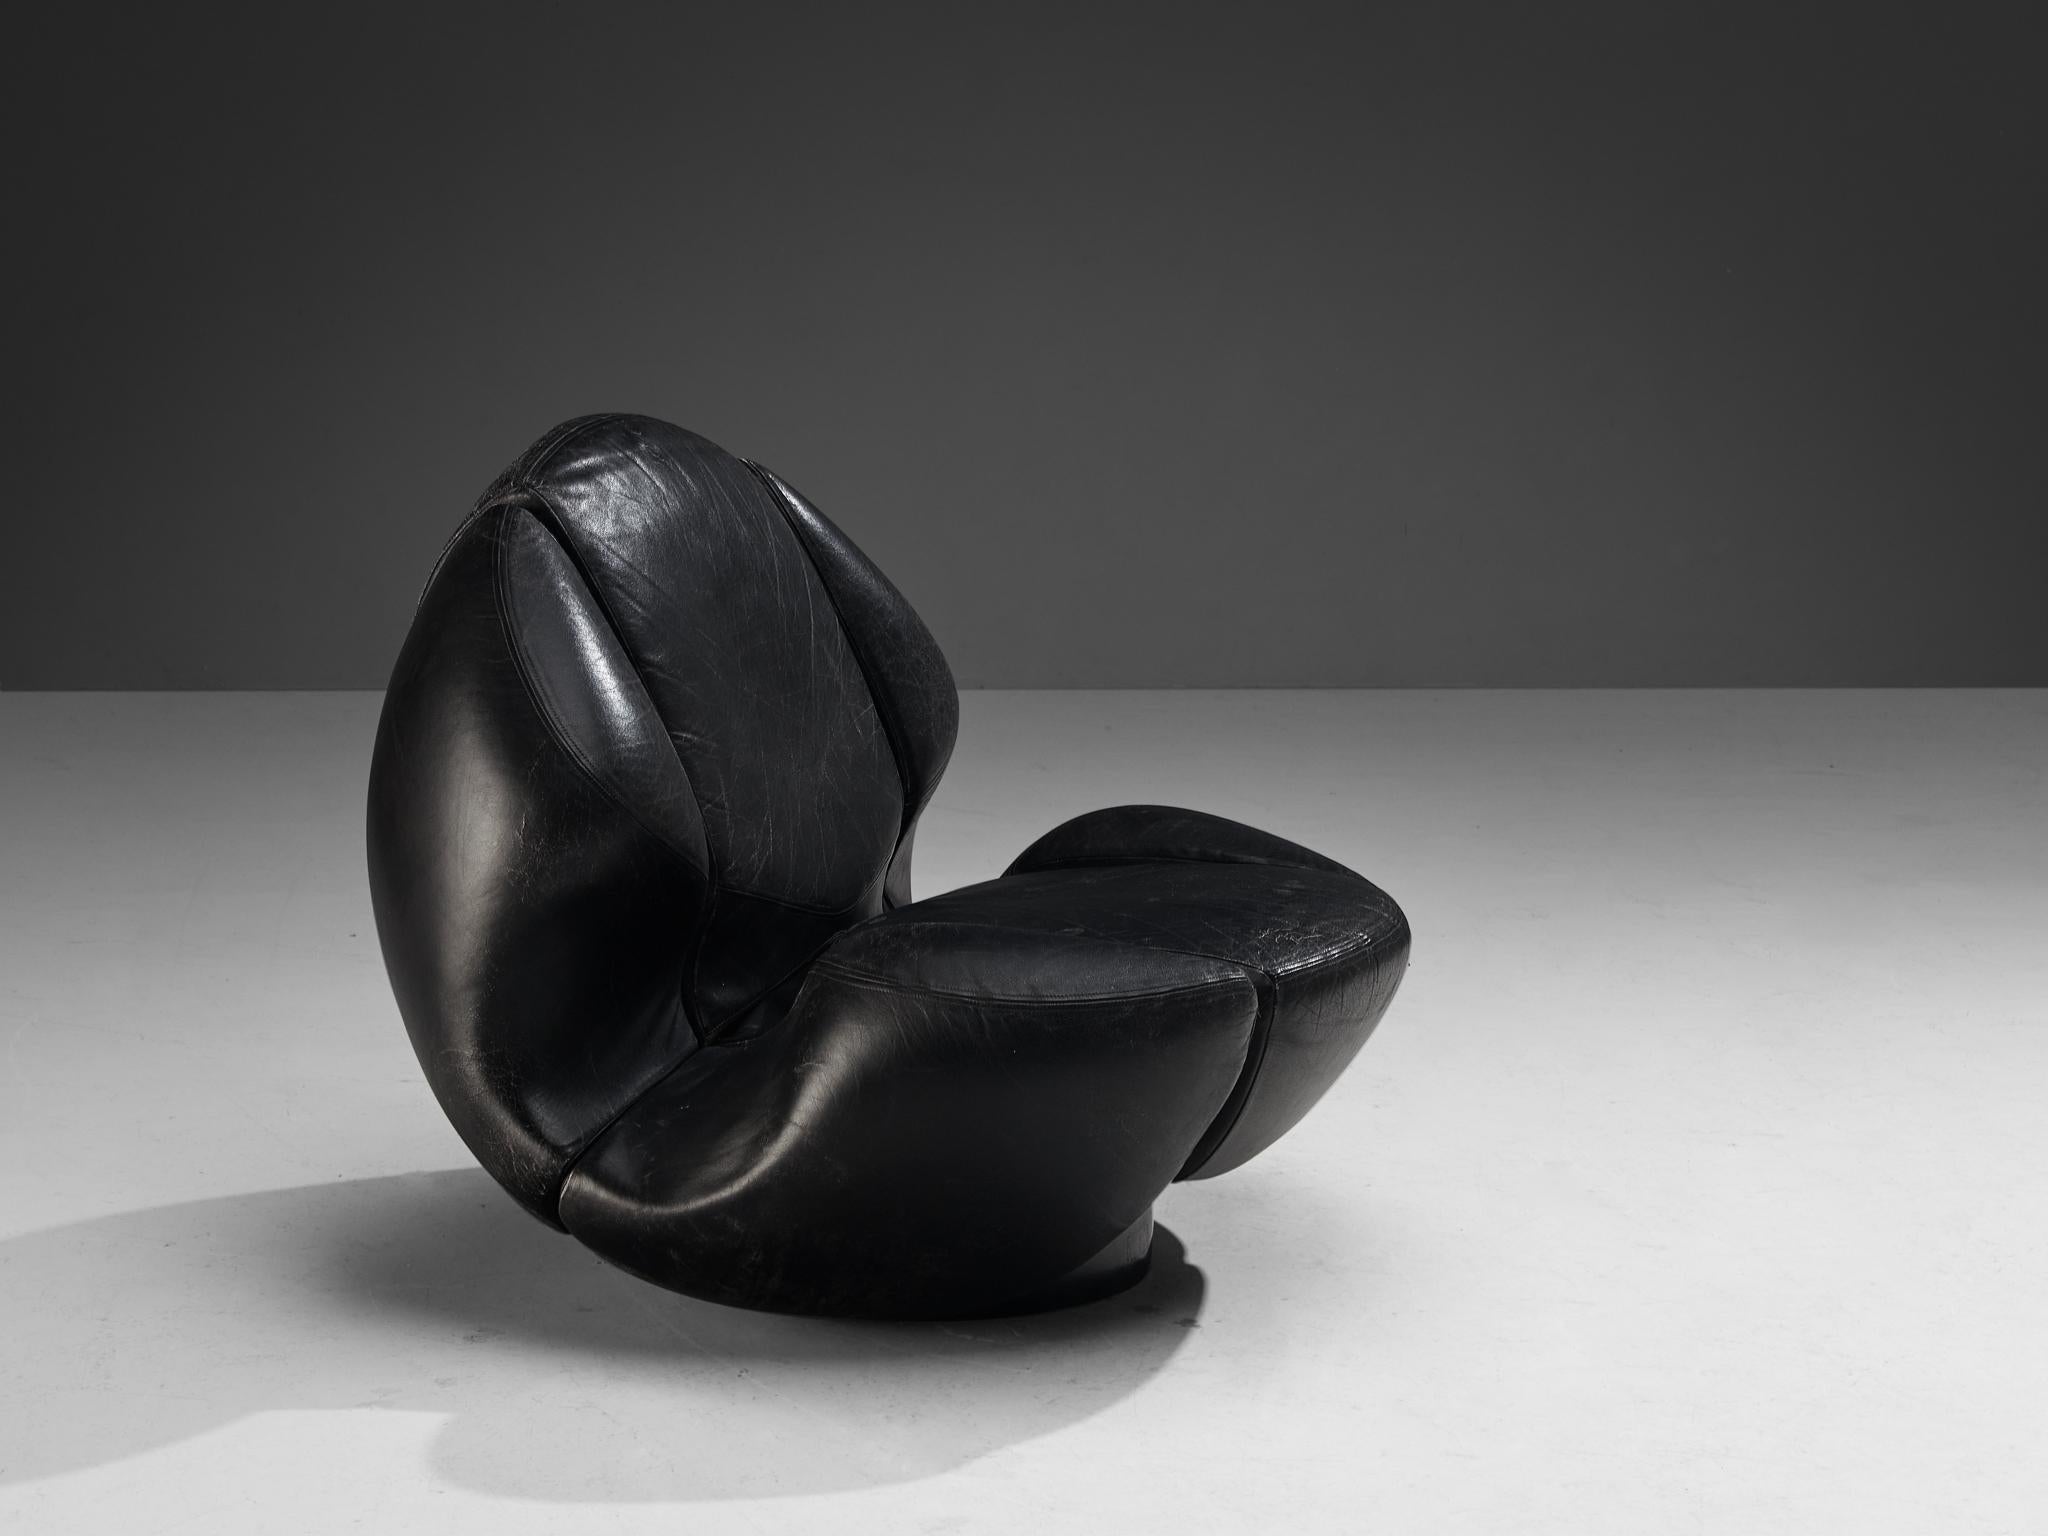 Mario Marenco for Comfortline, lounge chair, leather, molded polyurethane, Italy, 1980s

A postmodern club chair created by the Italian designer and actor Mario Marenco (1933-2019). With a rather unconvential form, this piece is a sculpture in